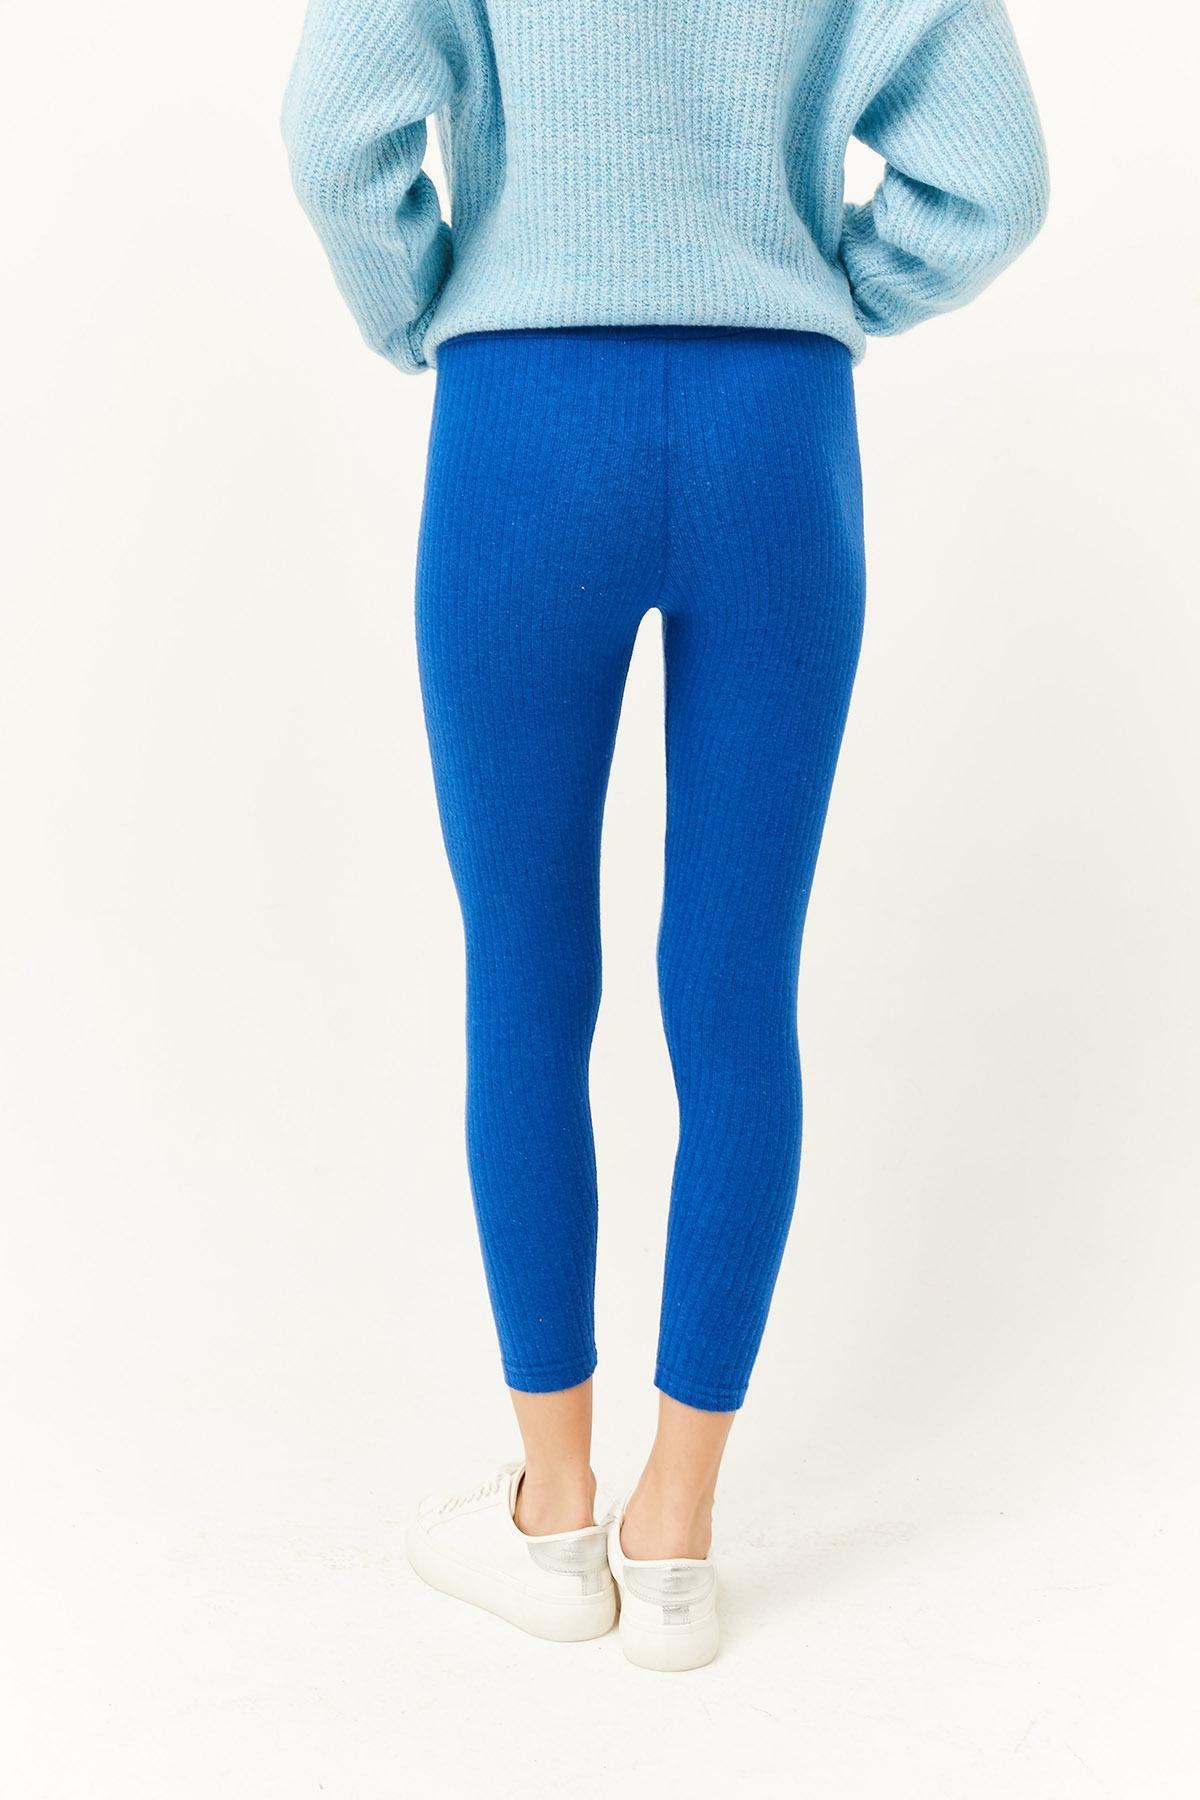 Olalook - Blue Thick Ribbed Raised Tights